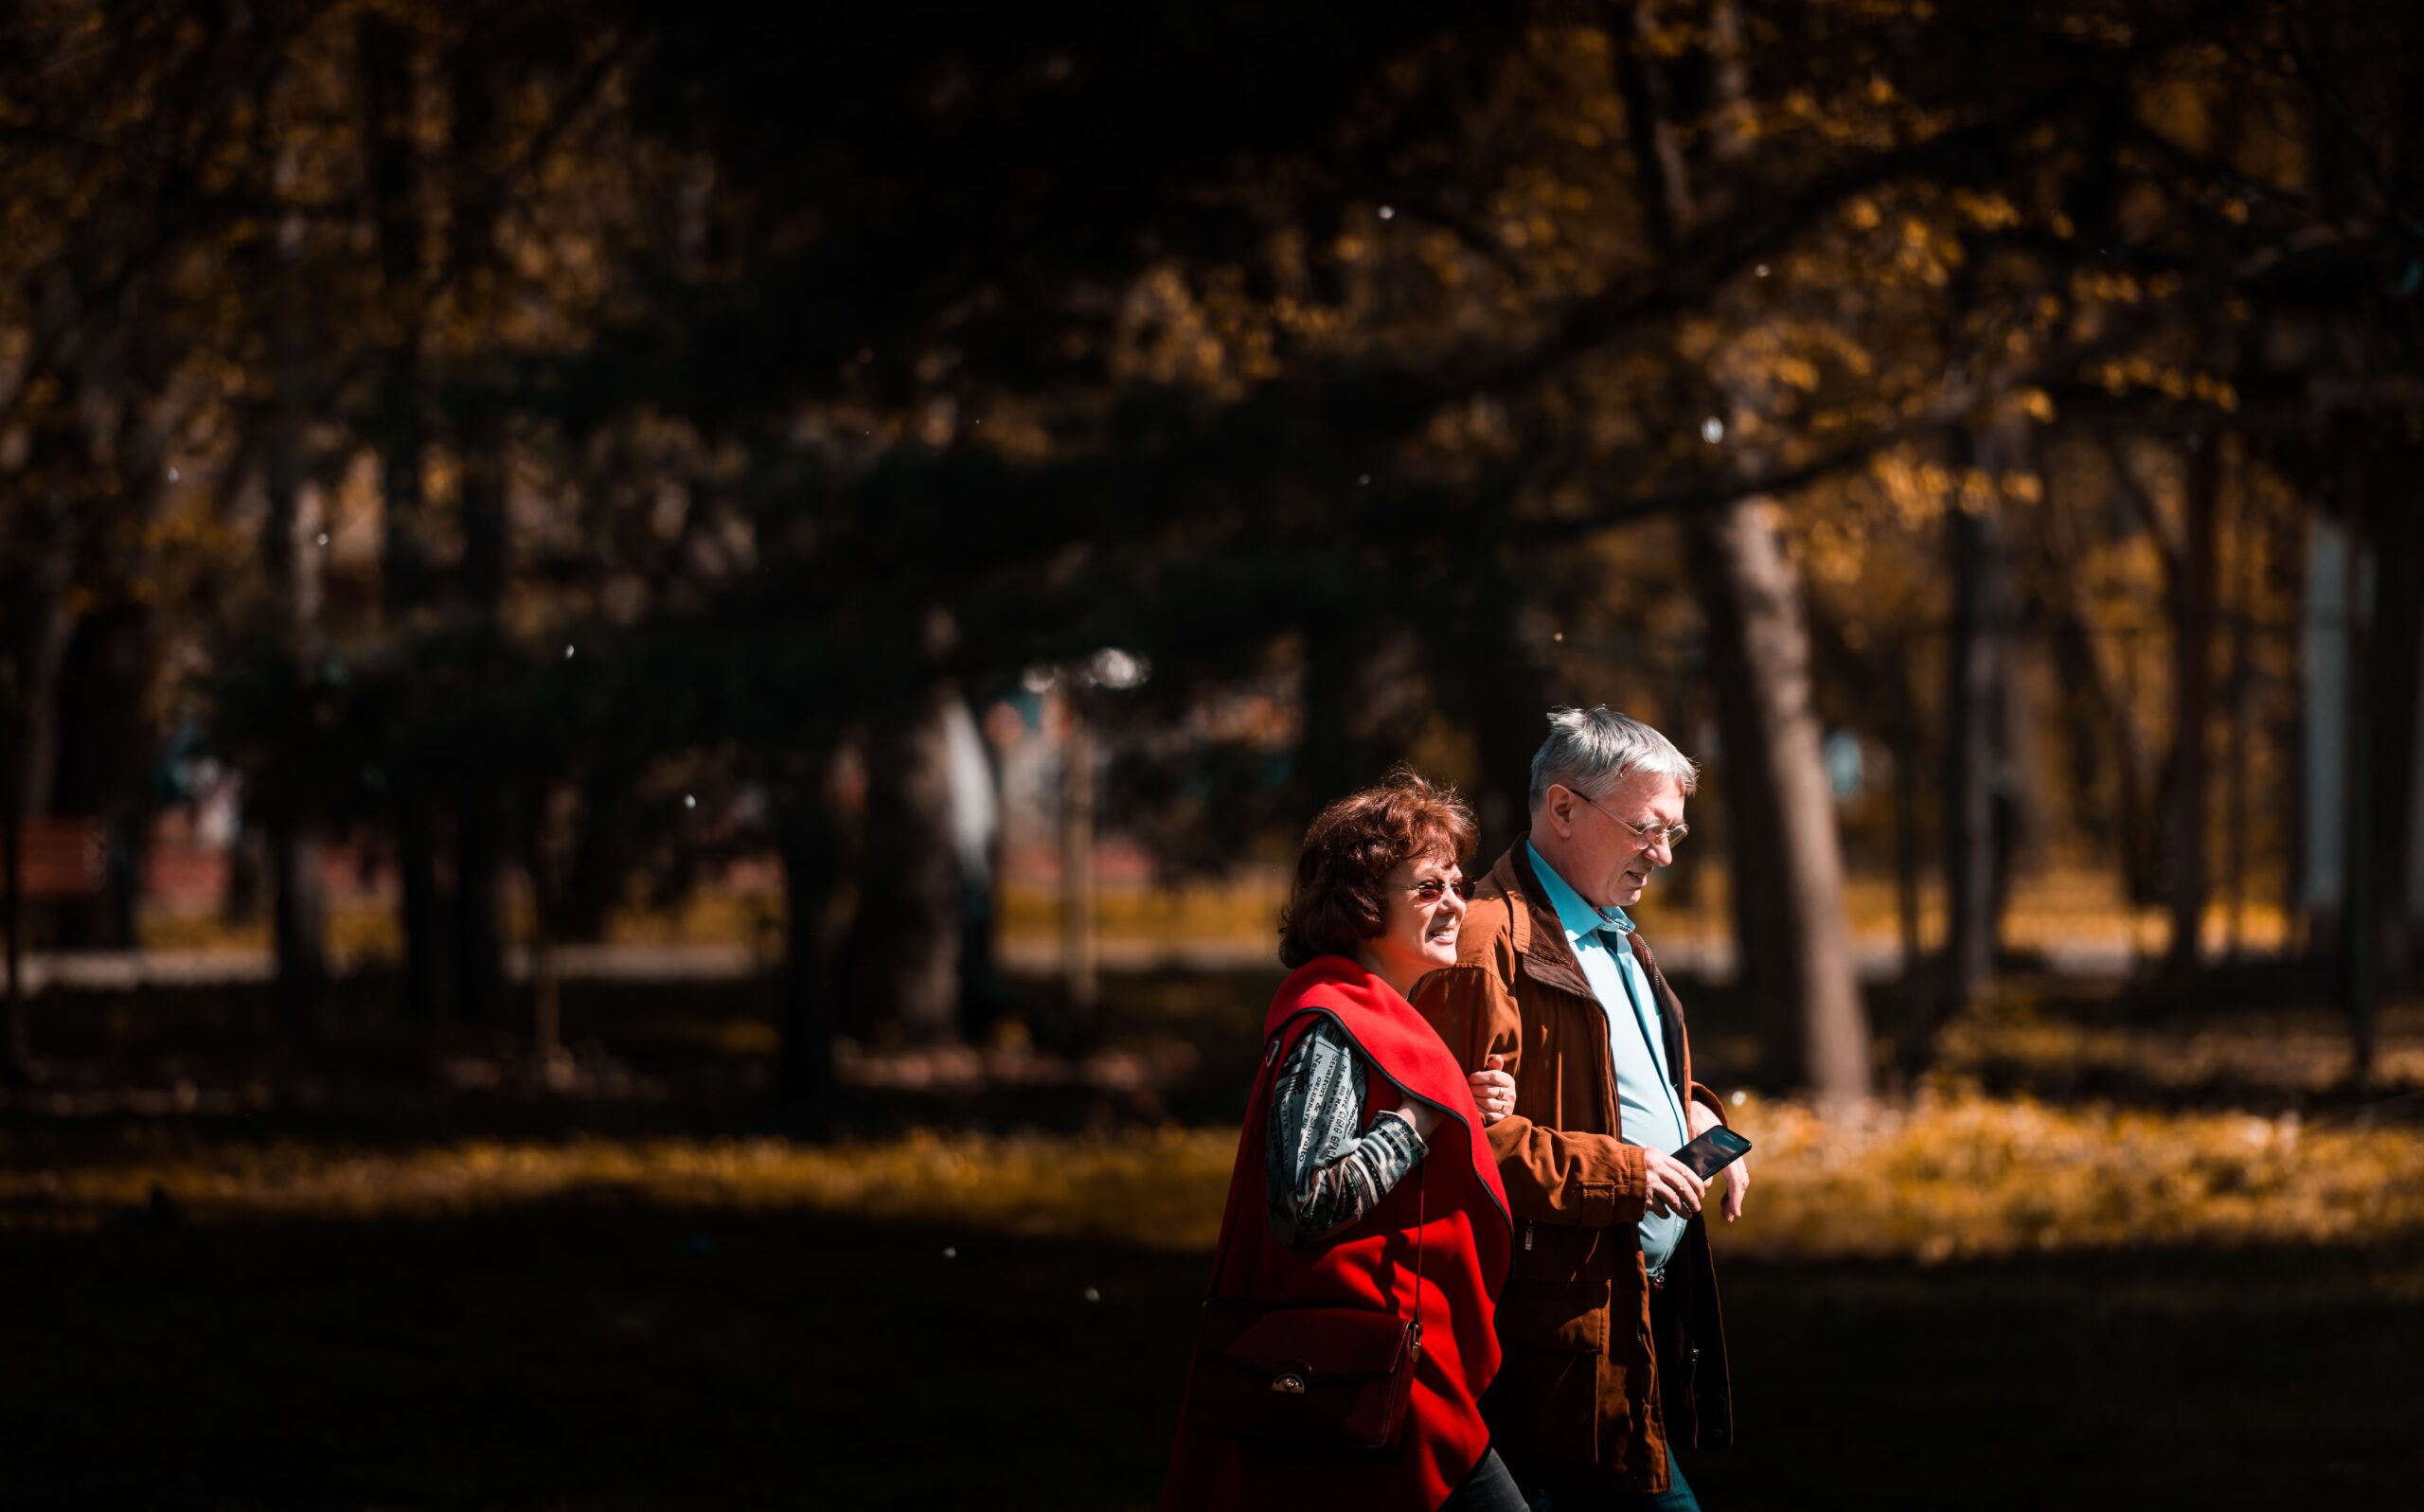 A middle-aged couple walking through a park